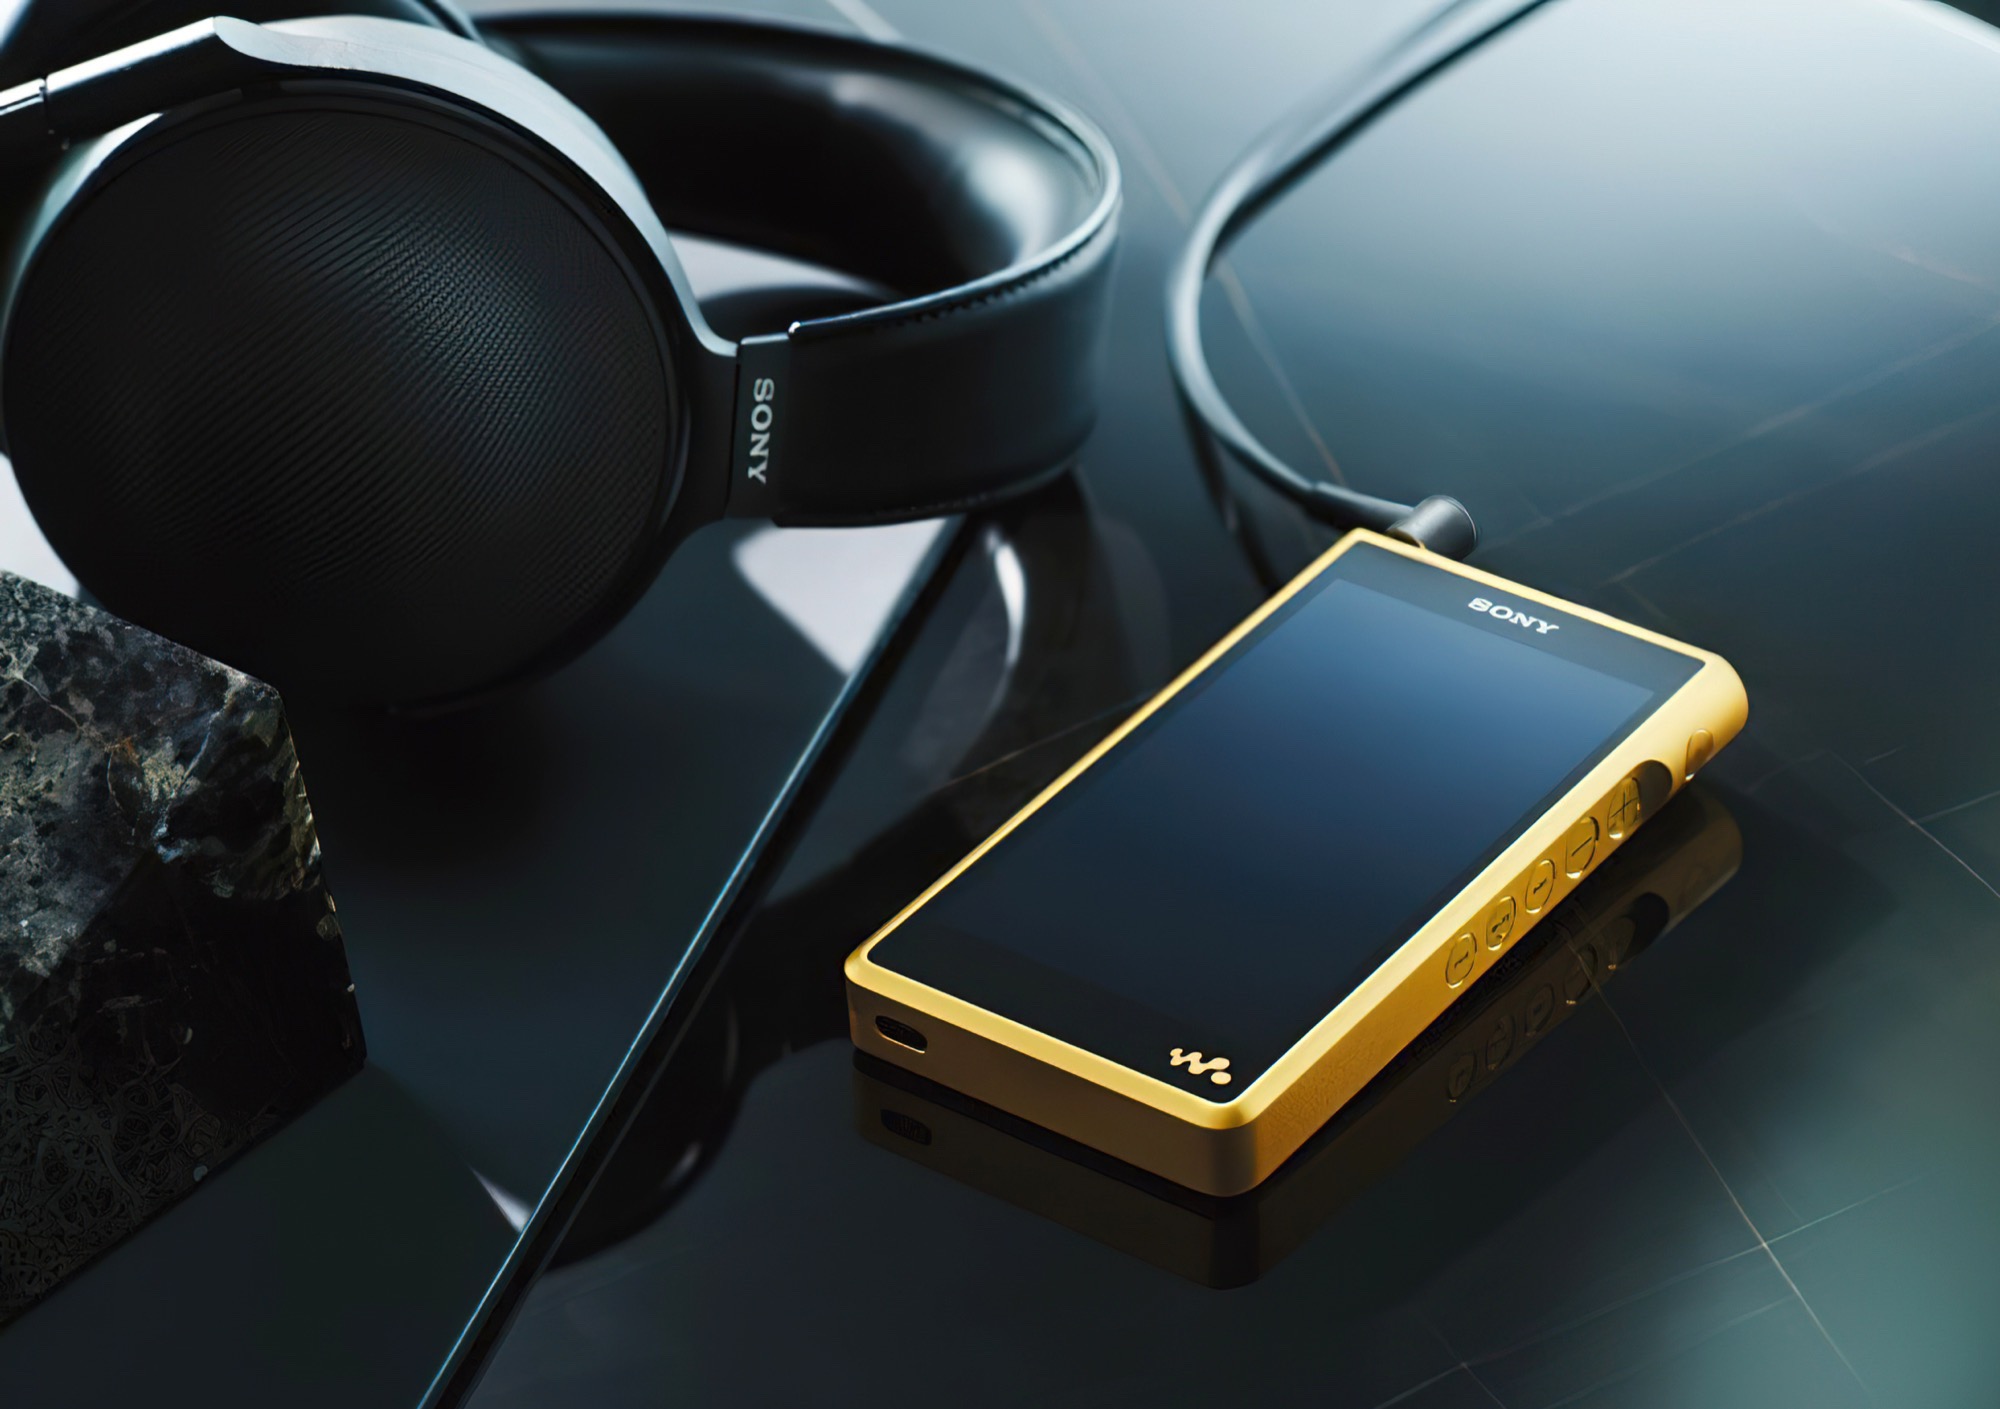 Sony introduces two new Walkman with Hi-Res Audio, DSD, LDAC and MQA support, plus up to 40 hours of battery life - NotebookCheck.net News